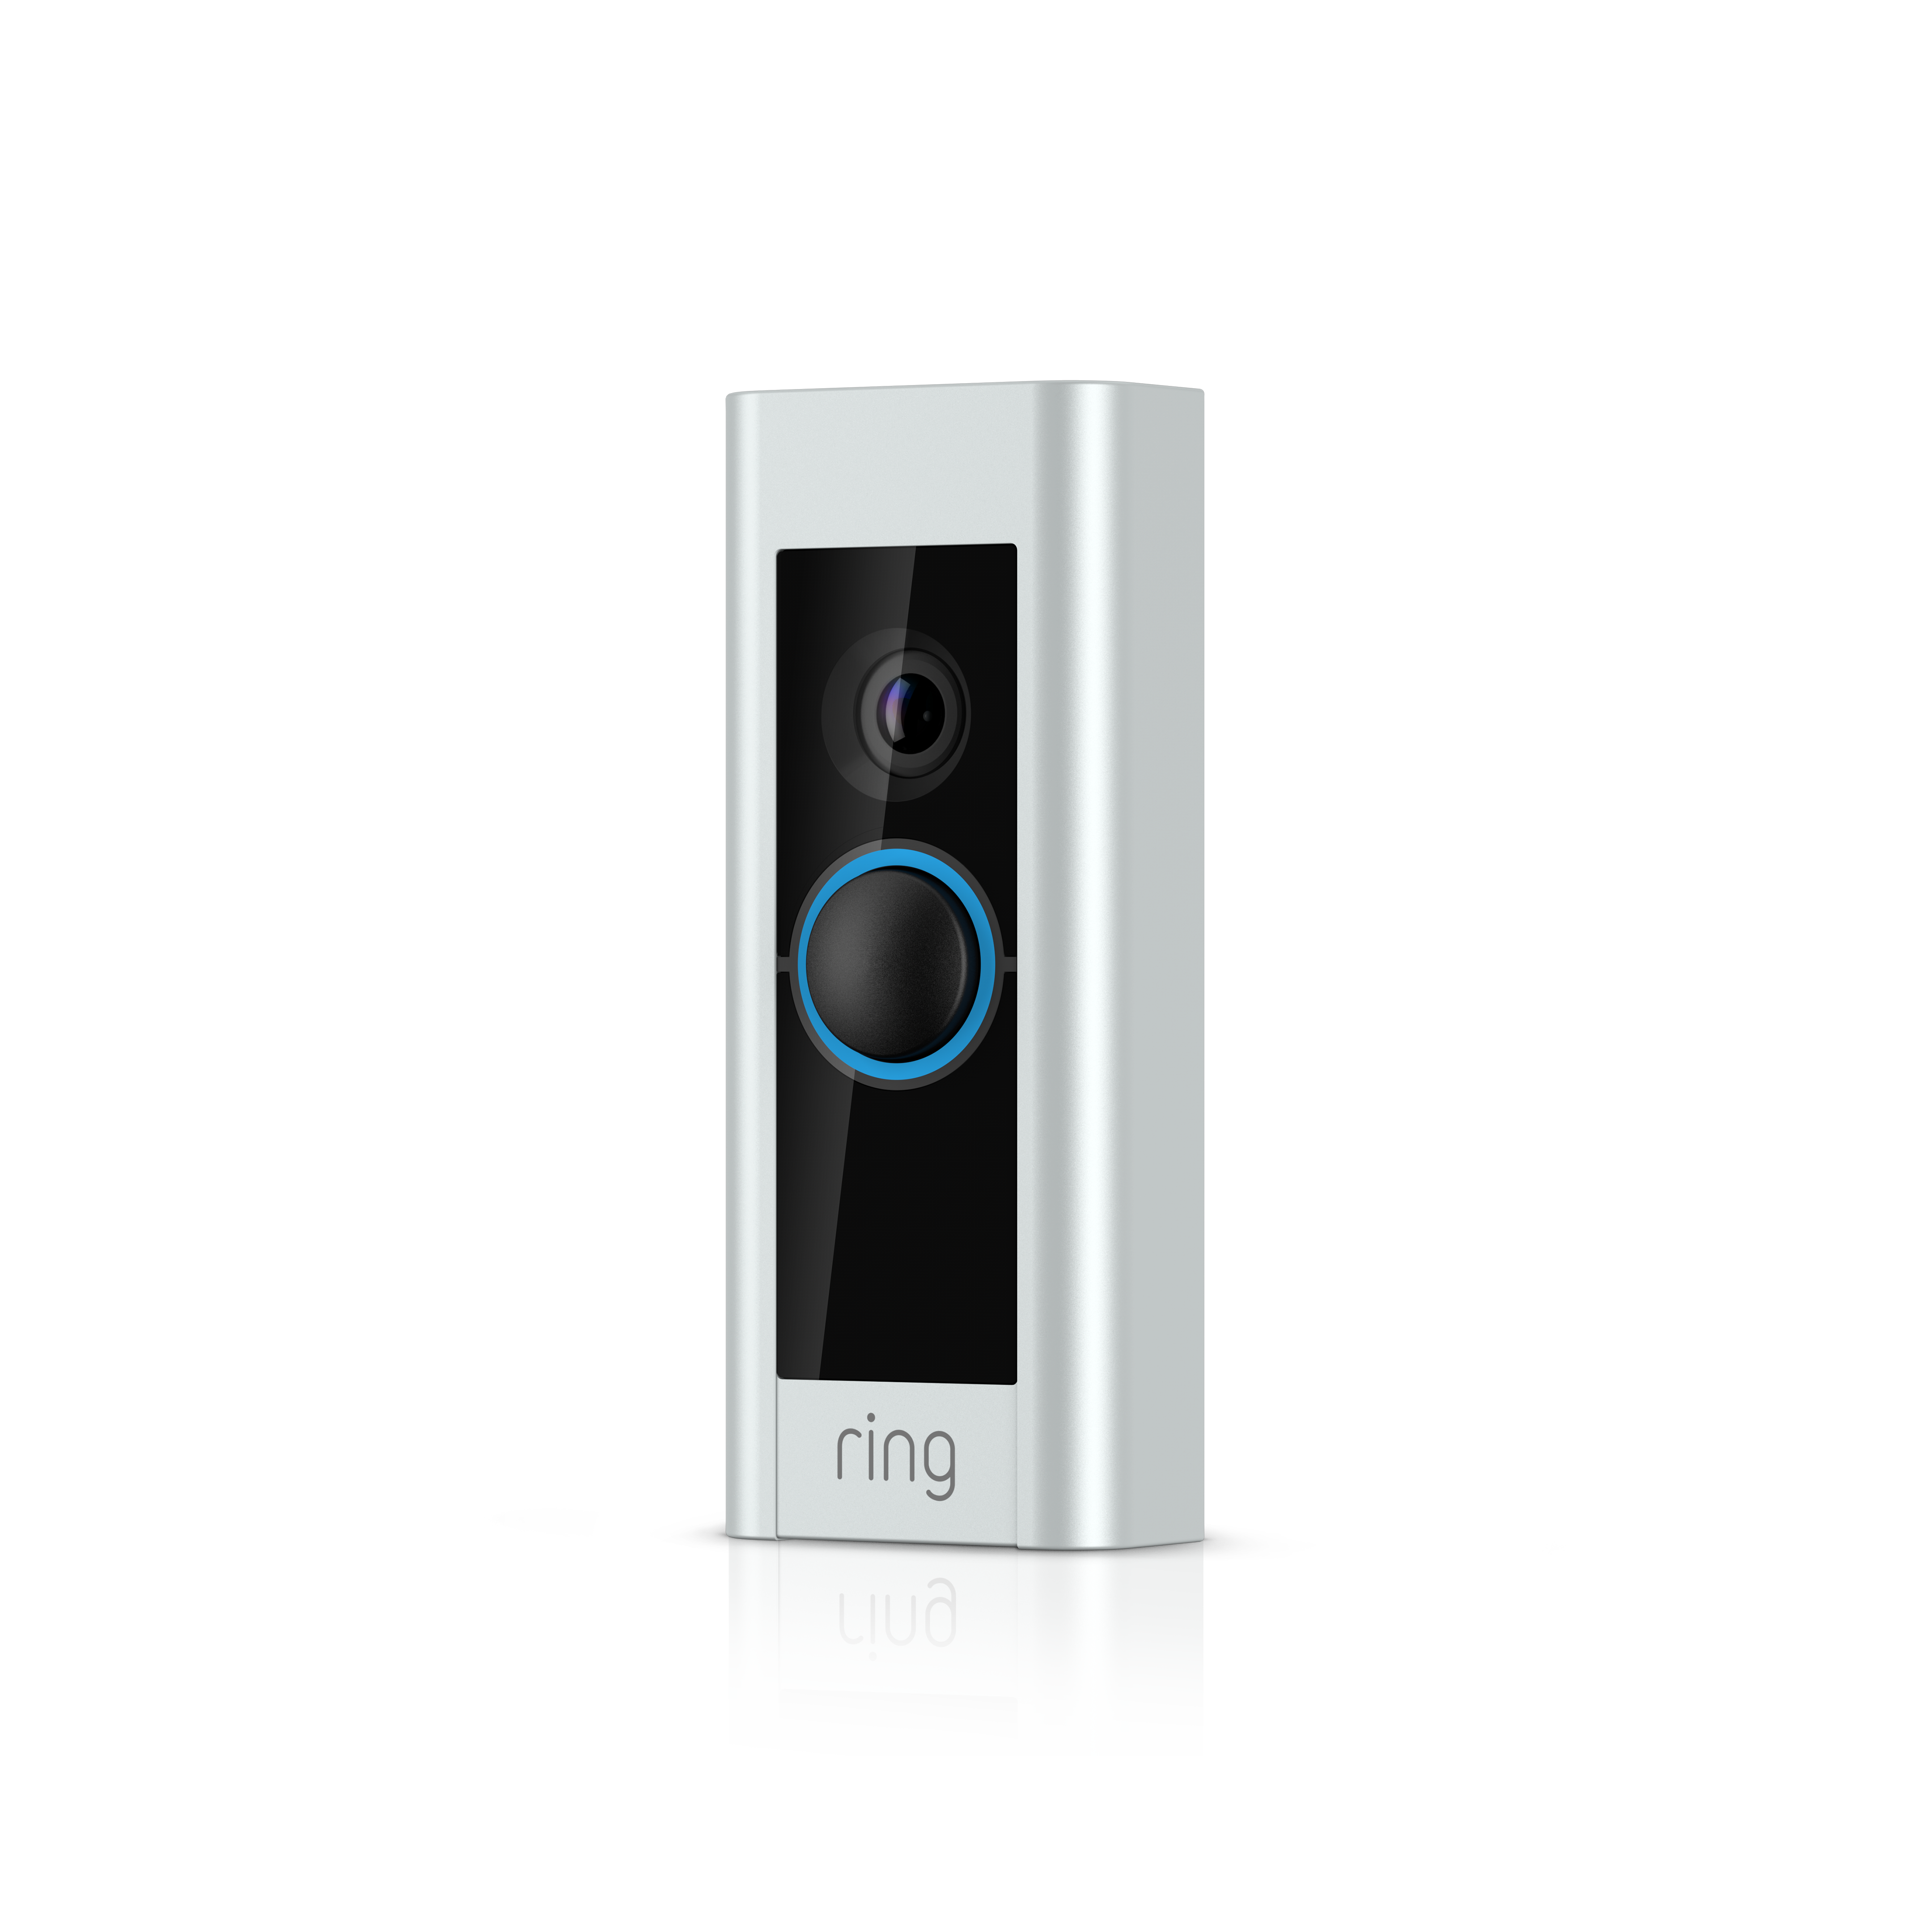 does a ring doorbell require a subscription